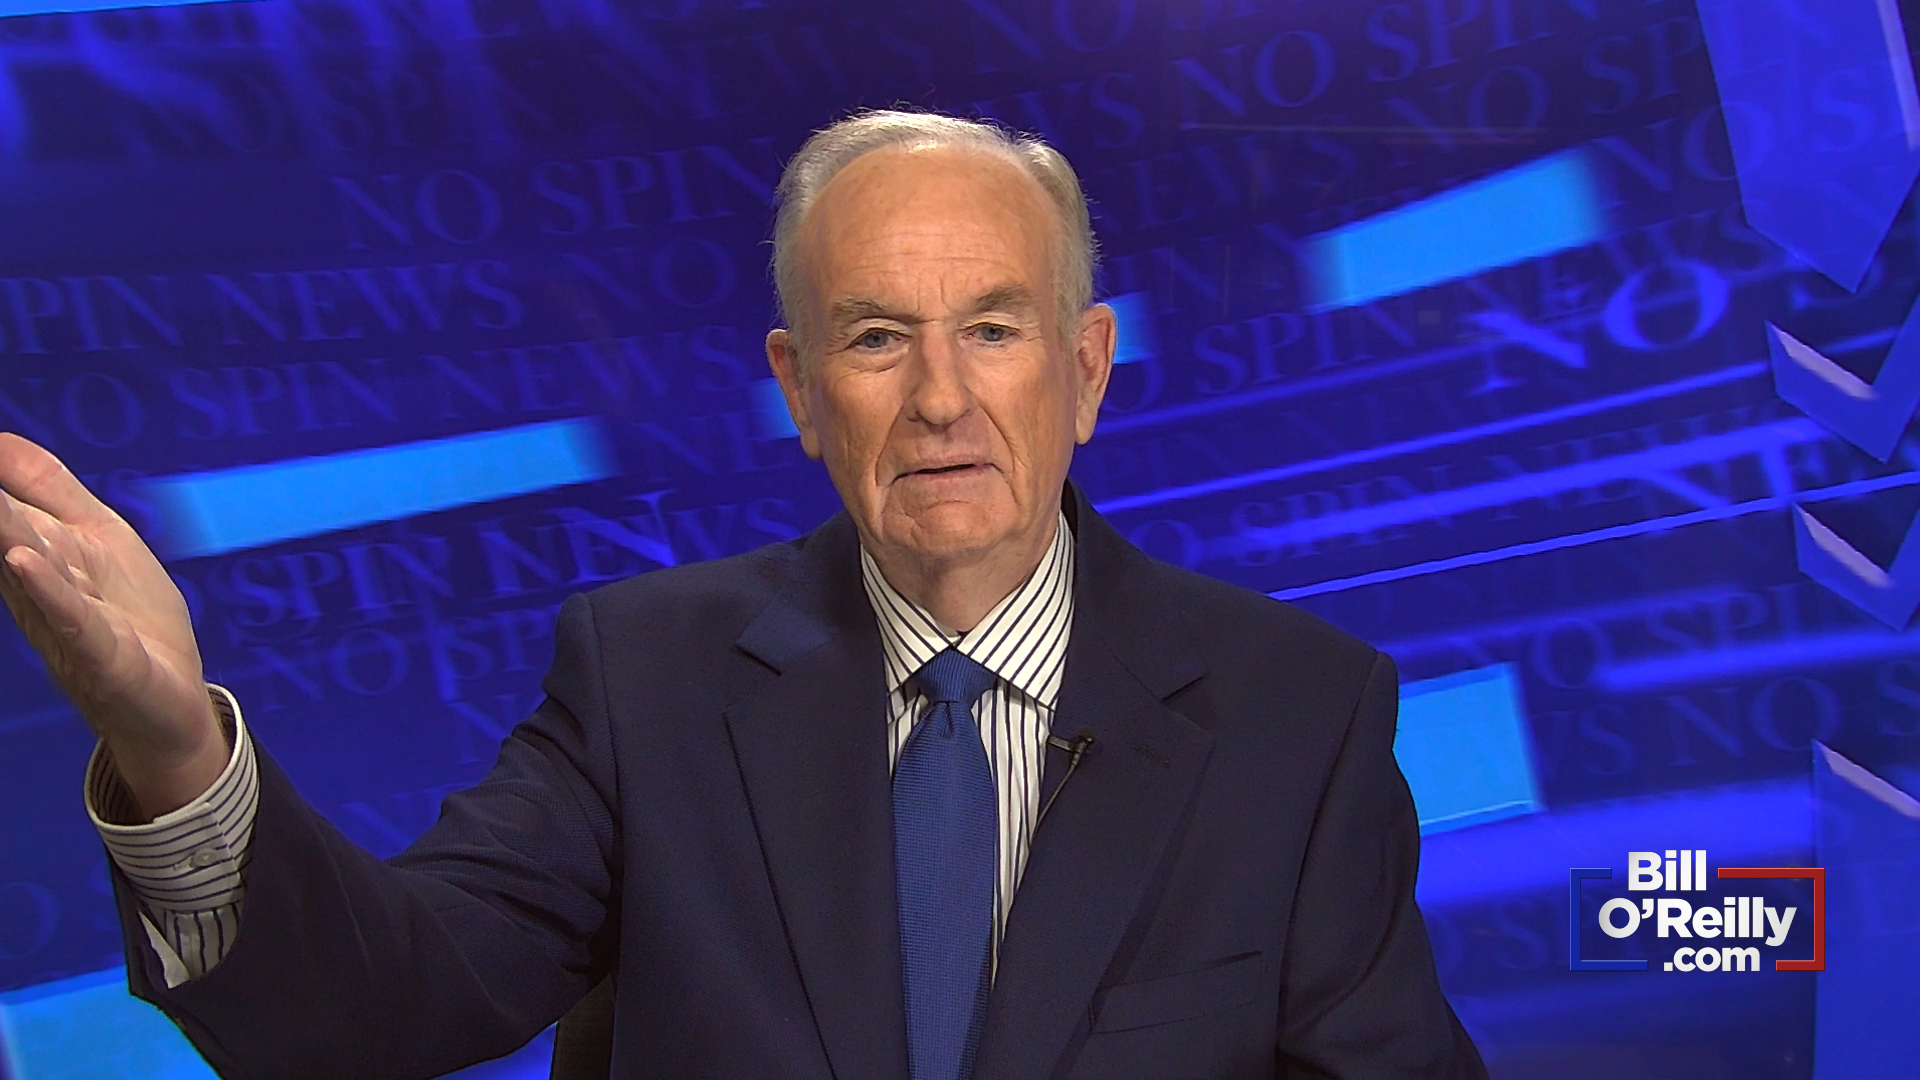 O'Reilly on Biden: 'He's Not Really There. It's an Apparition'